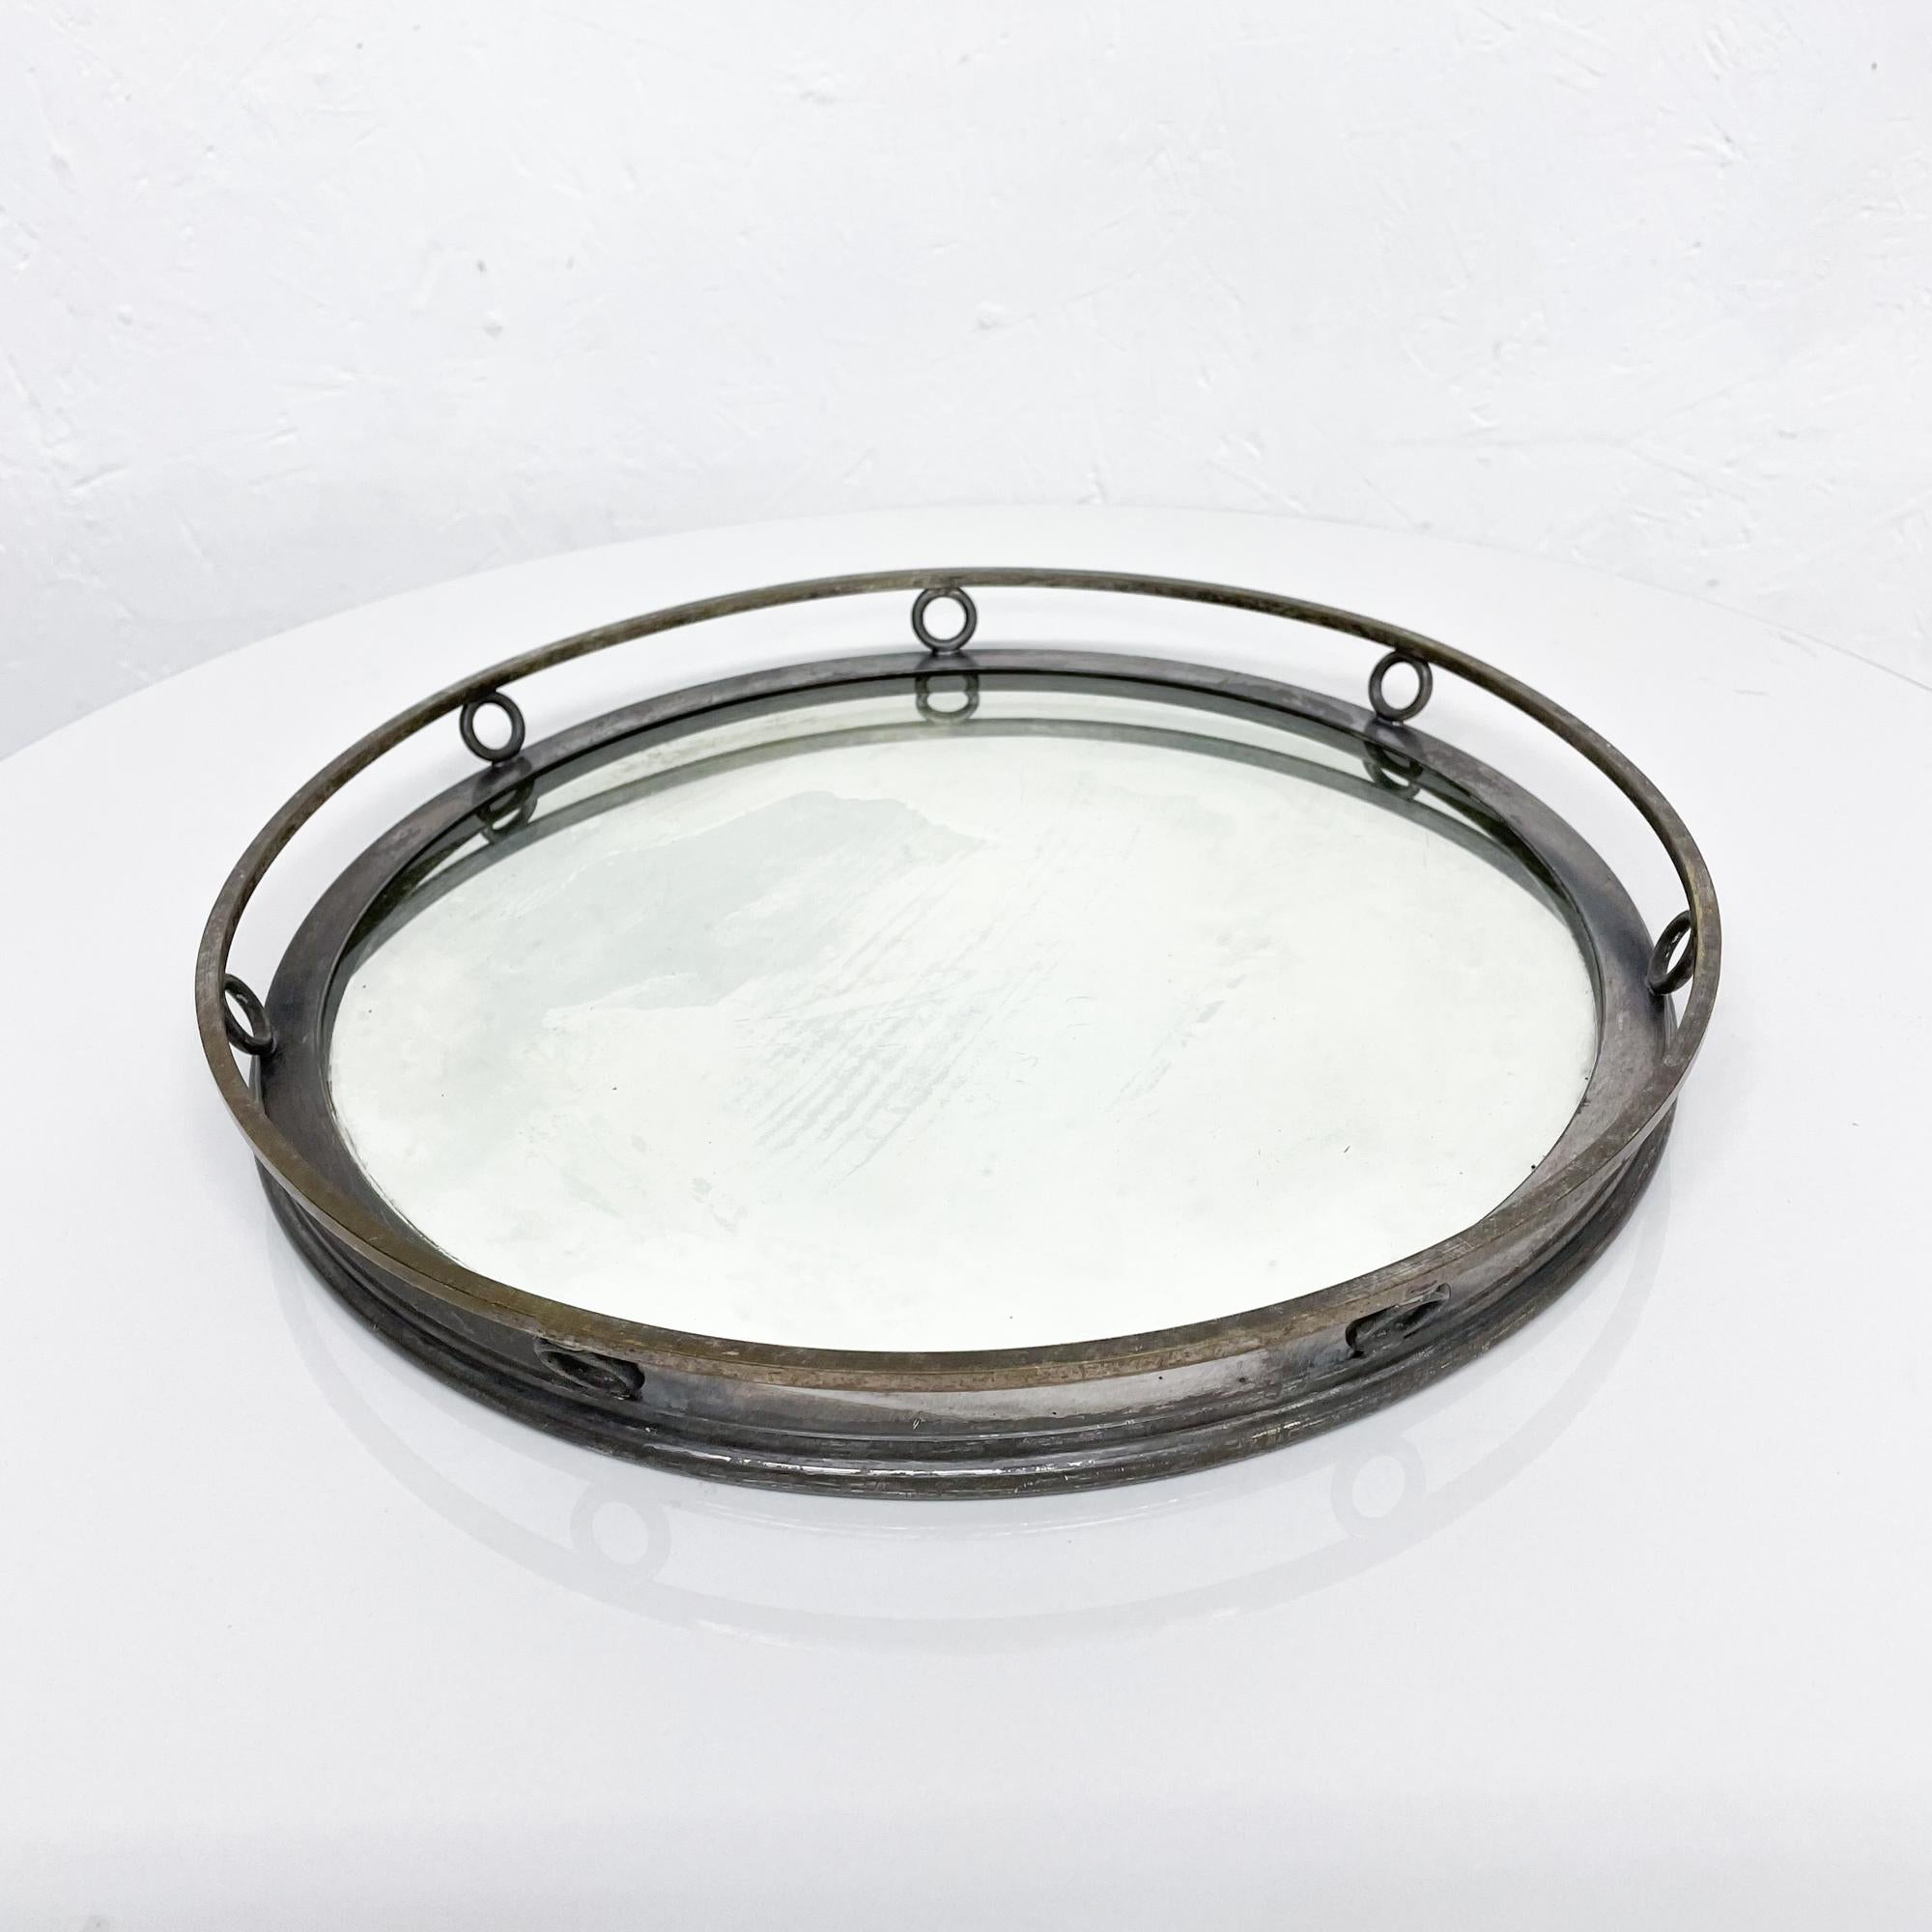 American Antique Art Deco Mirrored Circular Tray with Silver Plate Trim, 1950s, USA